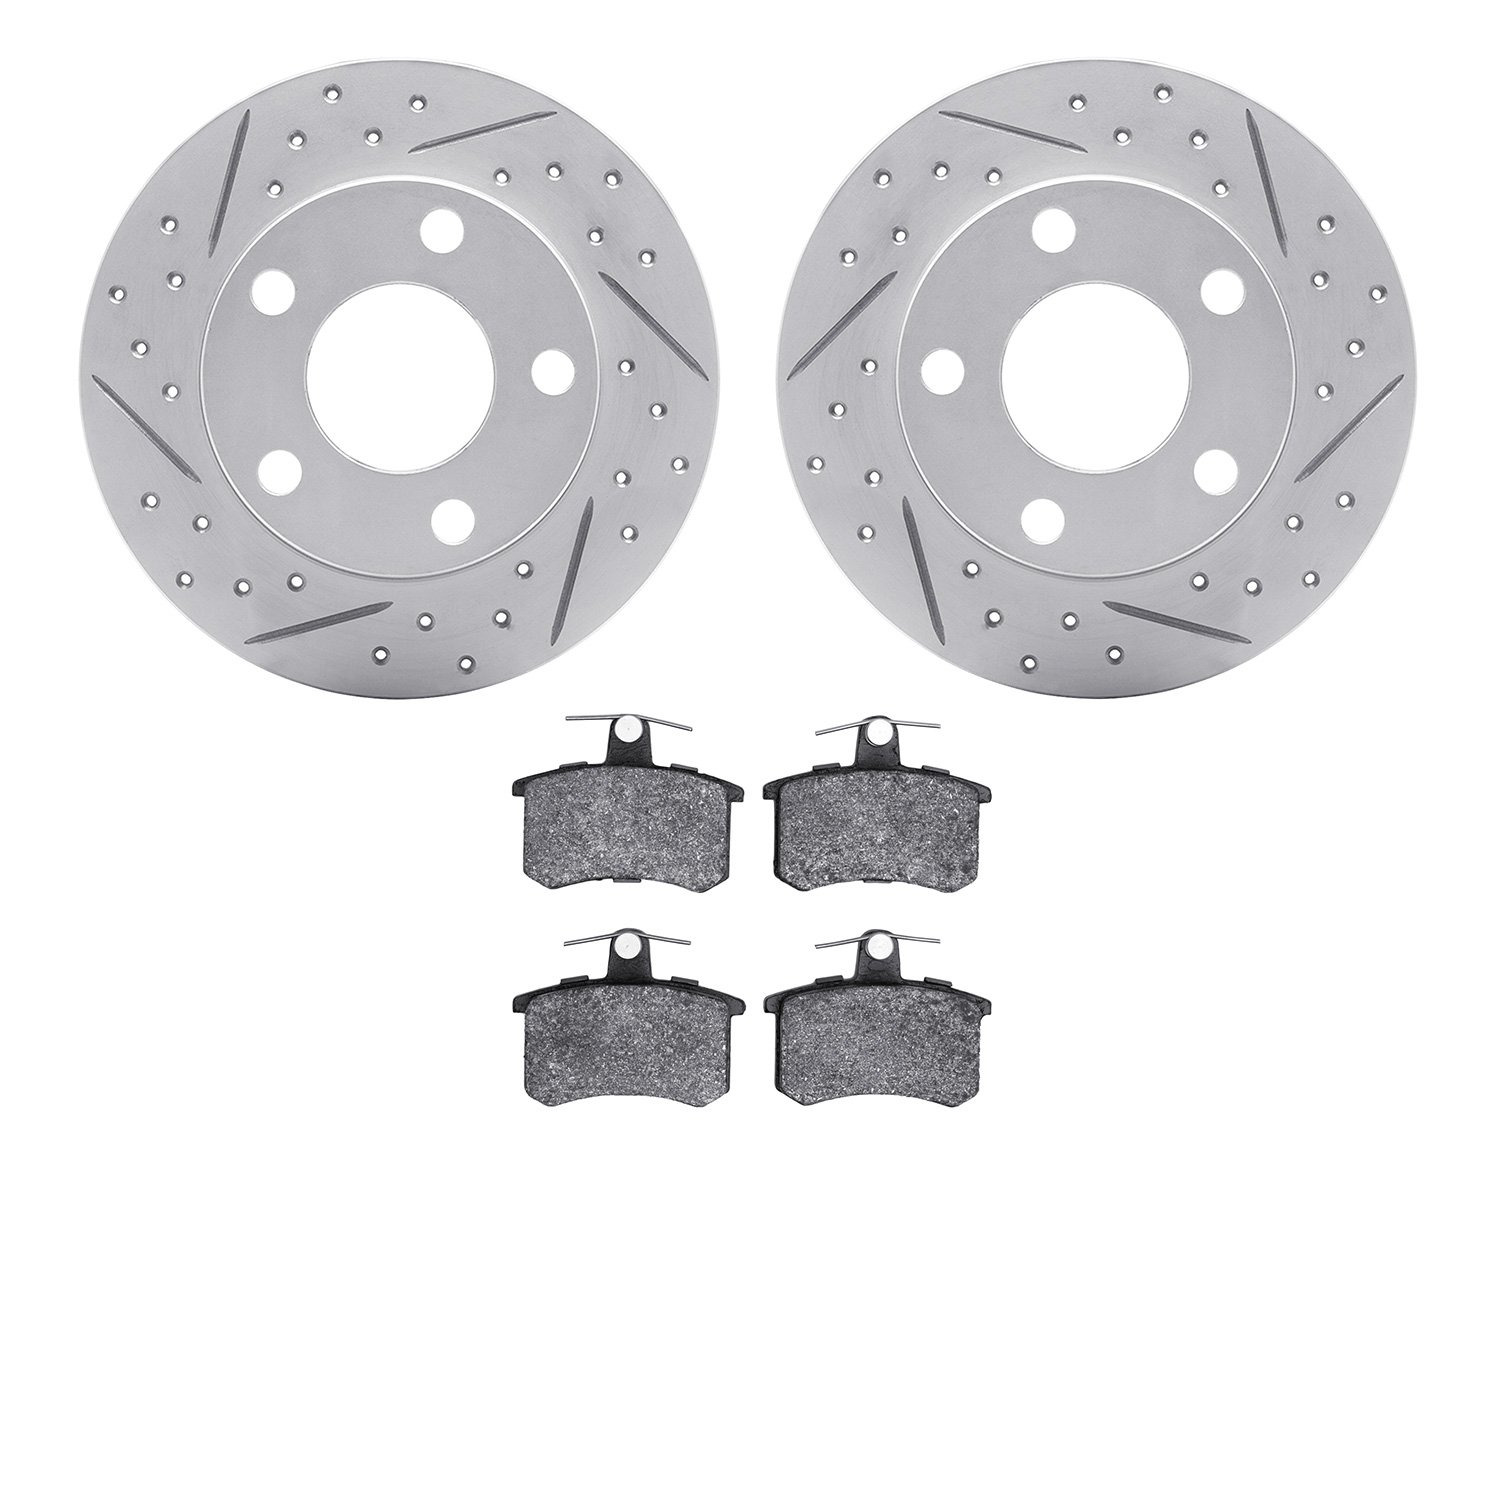 2502-74009 Geoperformance Drilled/Slotted Rotors w/5000 Advanced Brake Pads Kit, 1996-2001 Audi/Volkswagen, Position: Rear